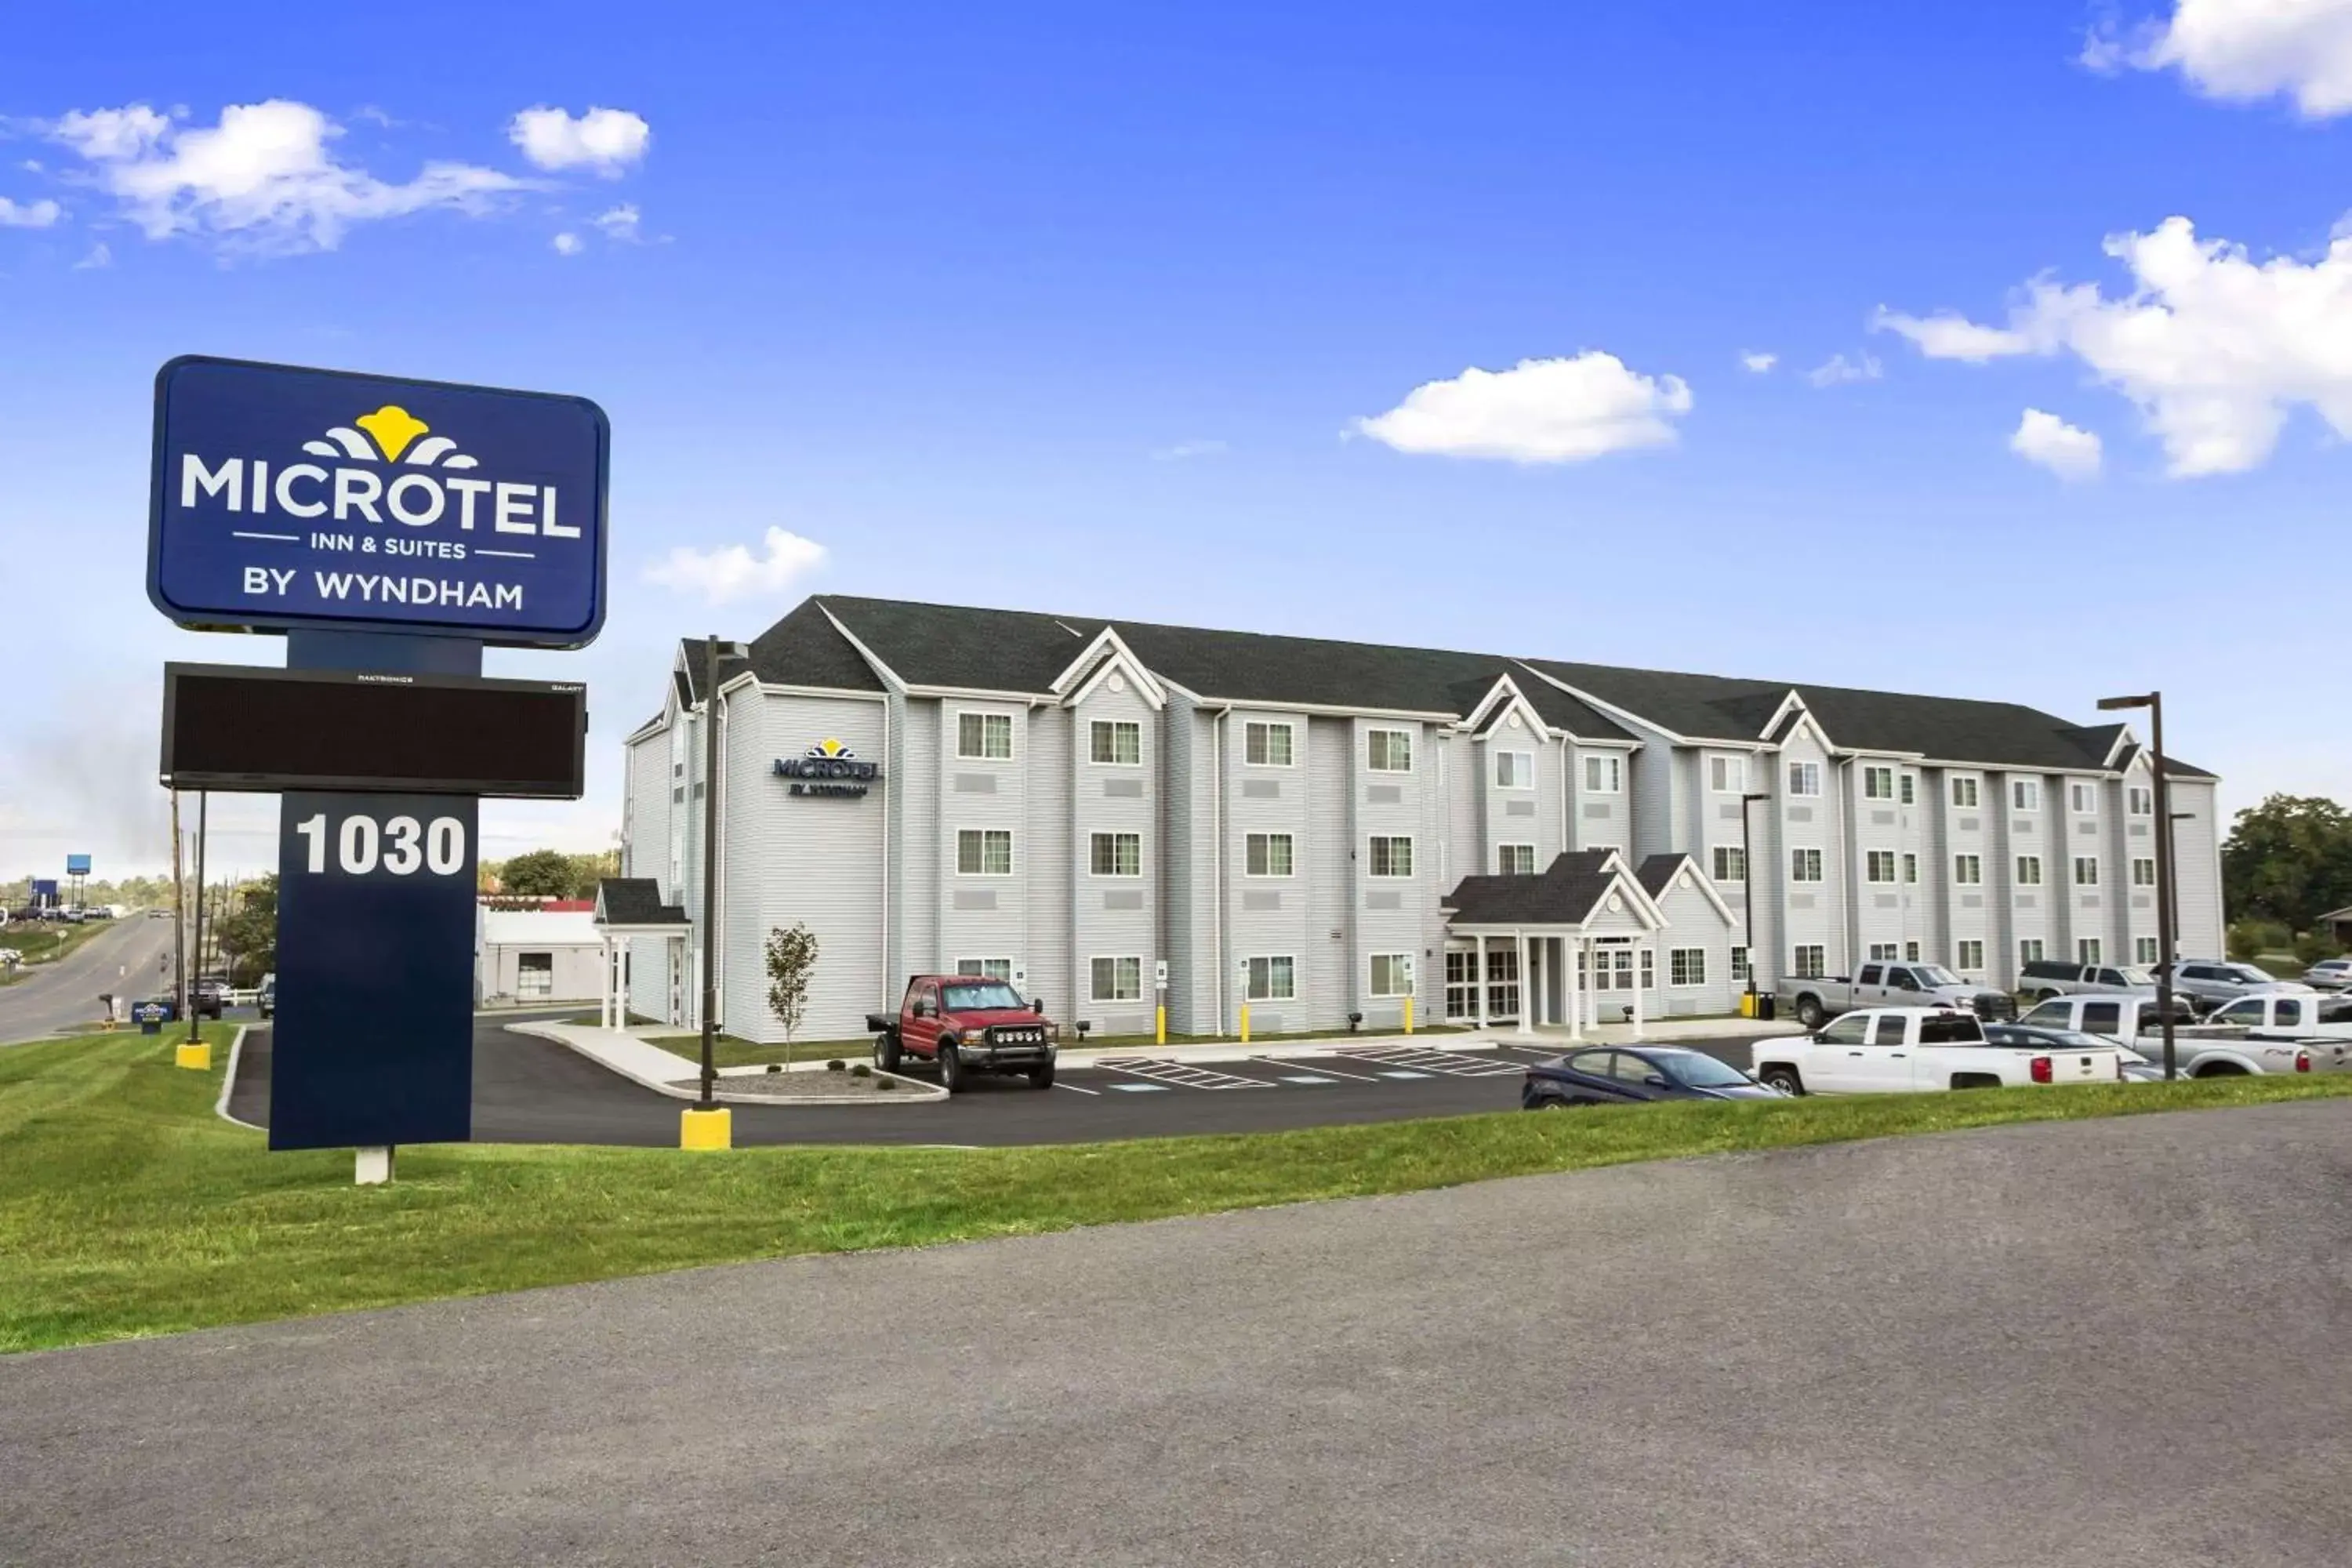 Property building in Microtel Inn and Suites Carrollton